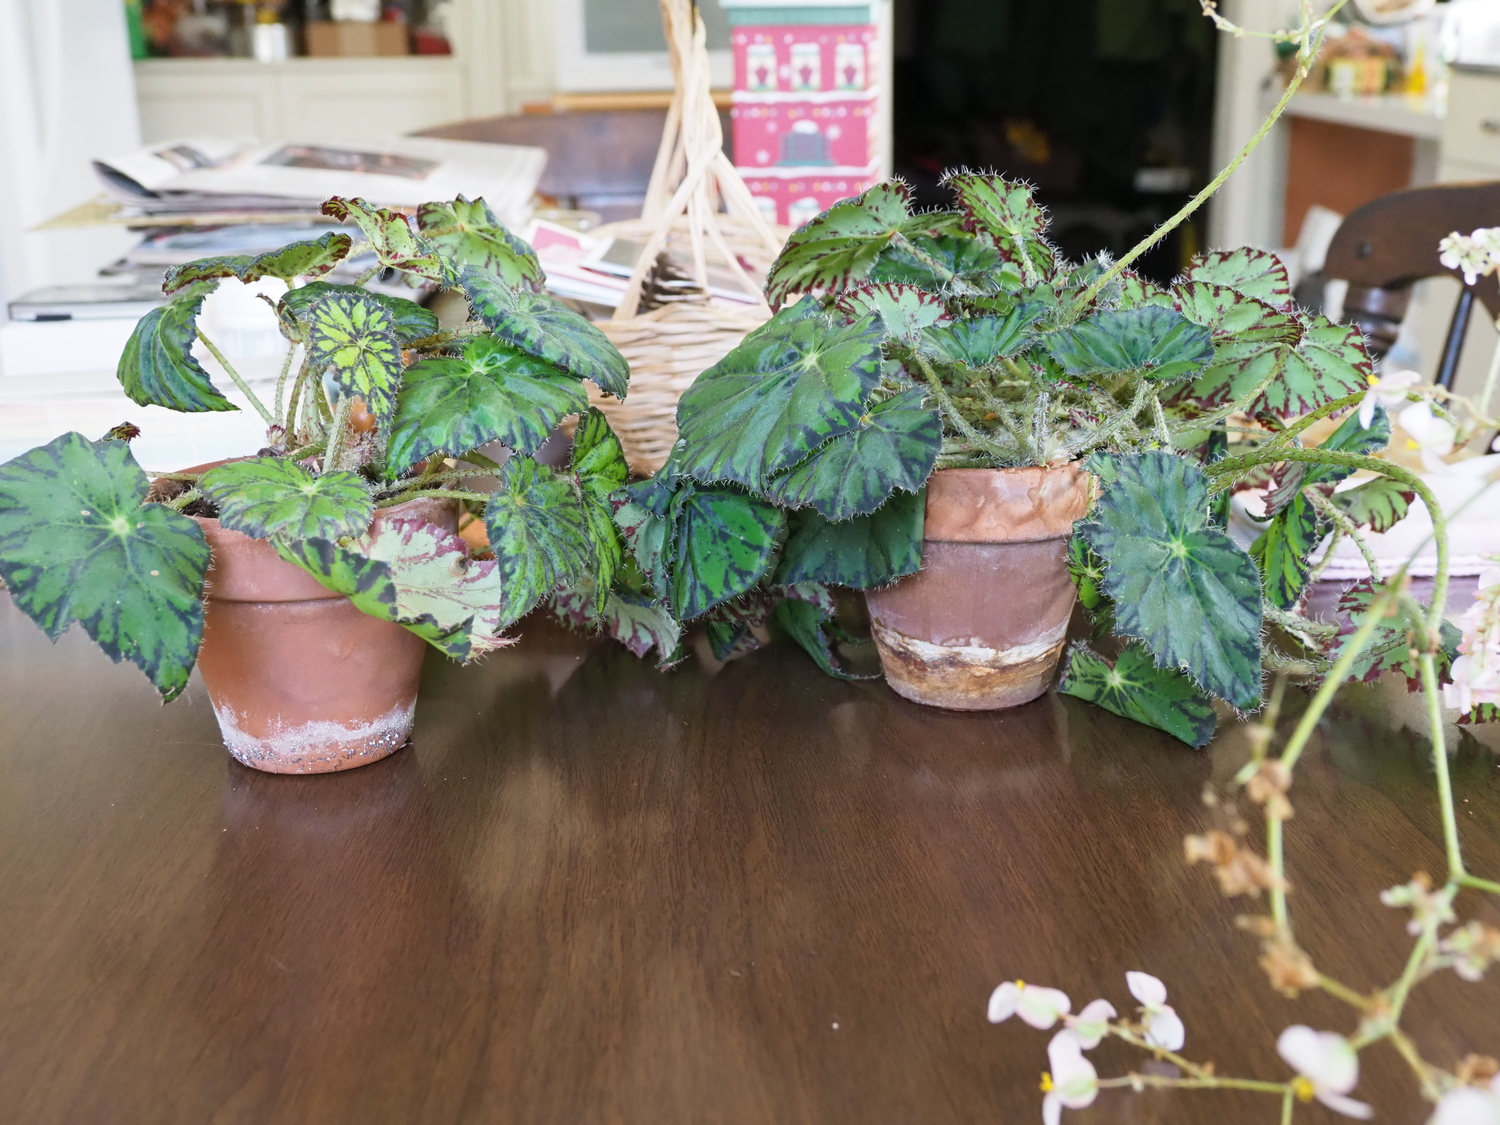 Two begonias started from leaf cuttings in February 2022. Both planted with the same soil in 4-inch clay pots. The plant on the left has had no fertilizer. The plant on the right fertilized on a regular basis. The fertilized plant has twice as many leaves and has been flowering for two months. The unfertilized plant (left) has never flowered and the coloration of the leaf in the center shows signs of nutrient deficiency.
 ANDREW MESSINGER